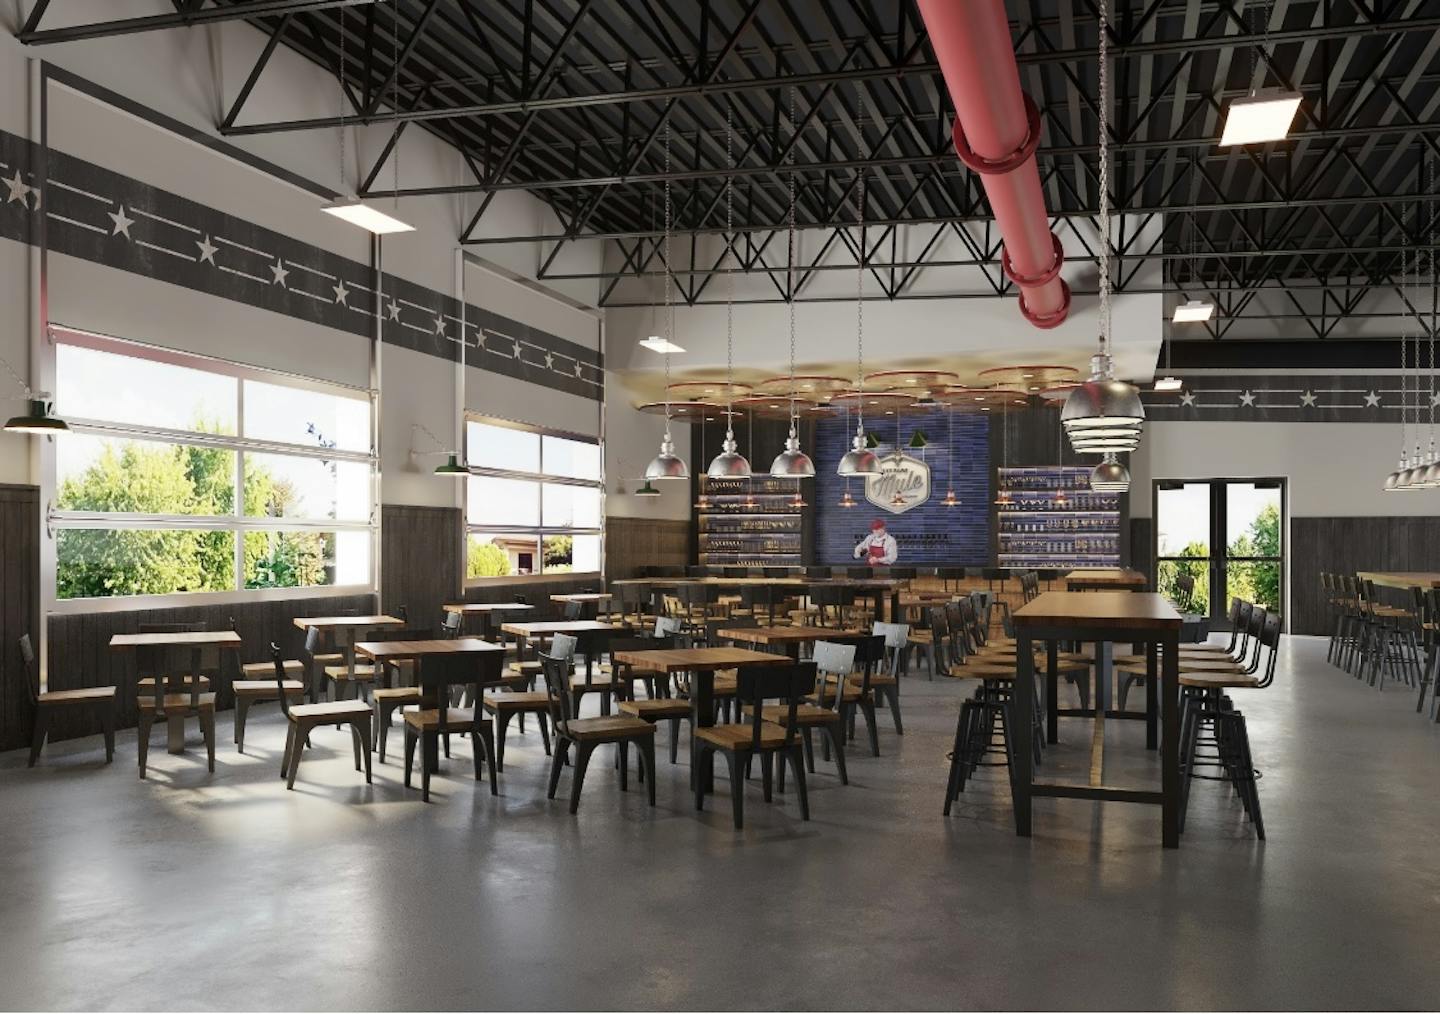 Render of the inside of the brewpub